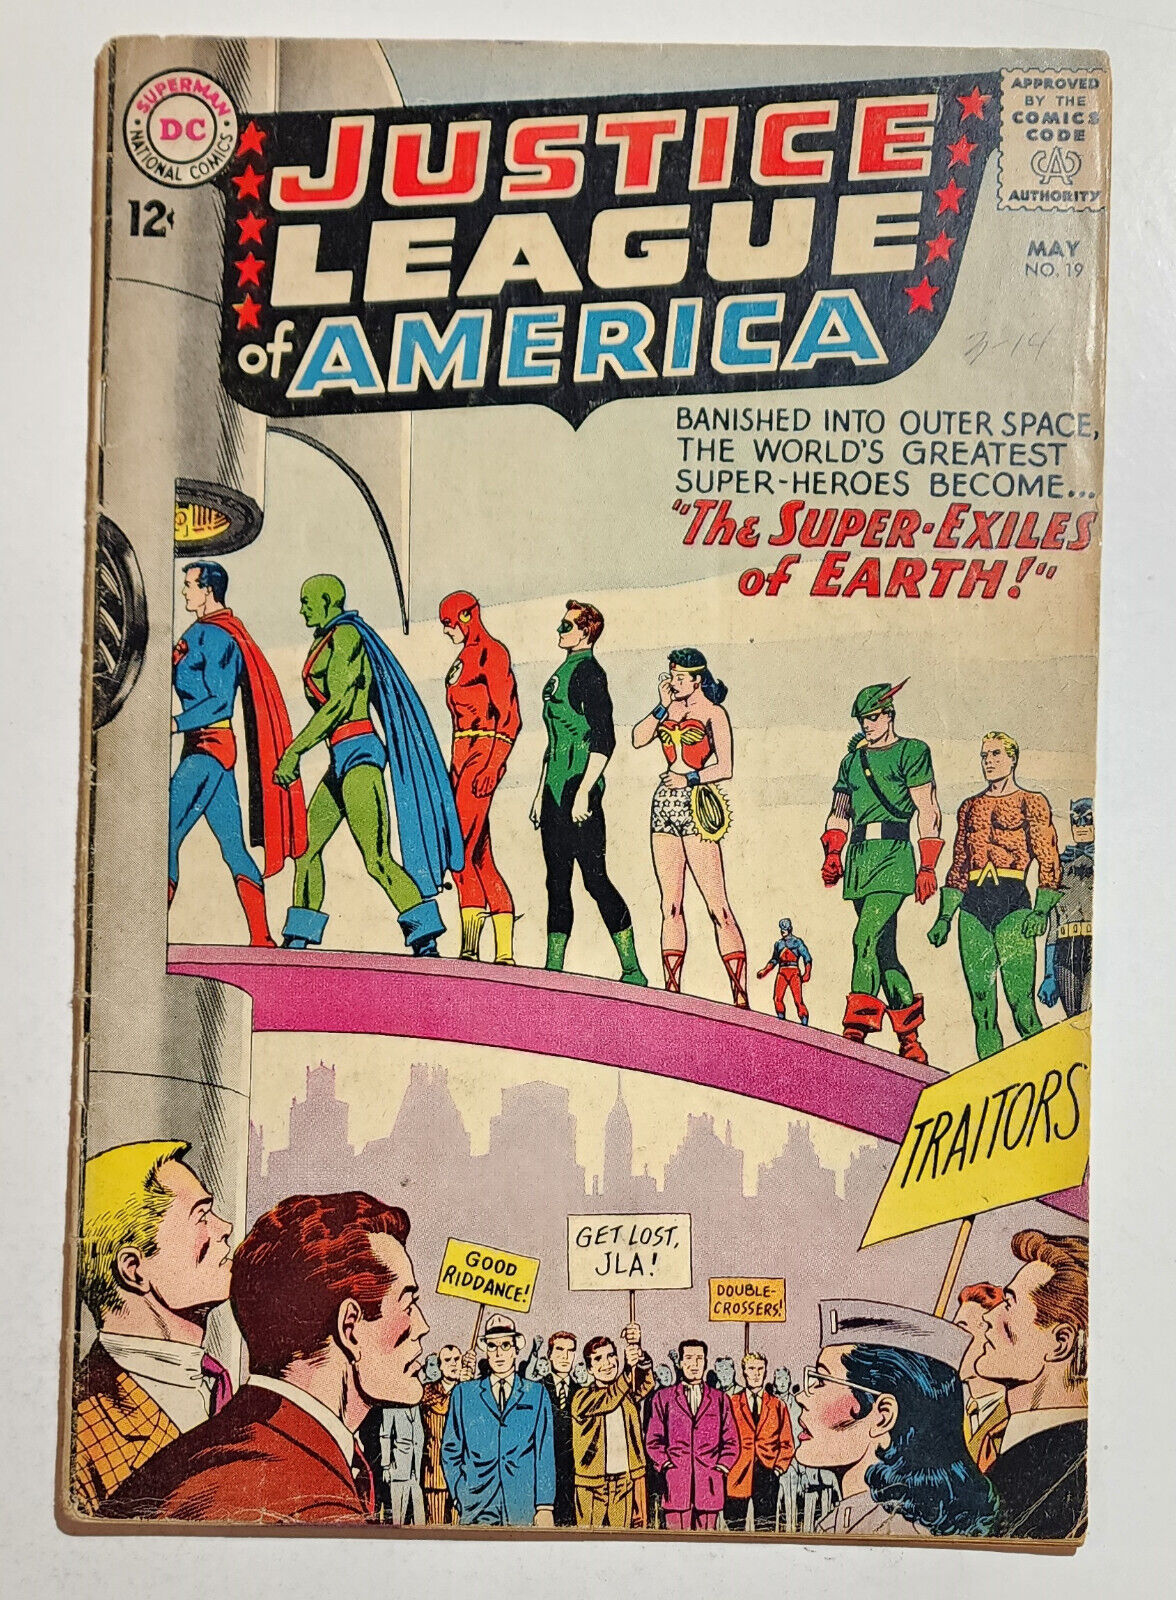 JUSTICE LEAGUE of AMERICA #19 1963 Silver Age DC Classic cover